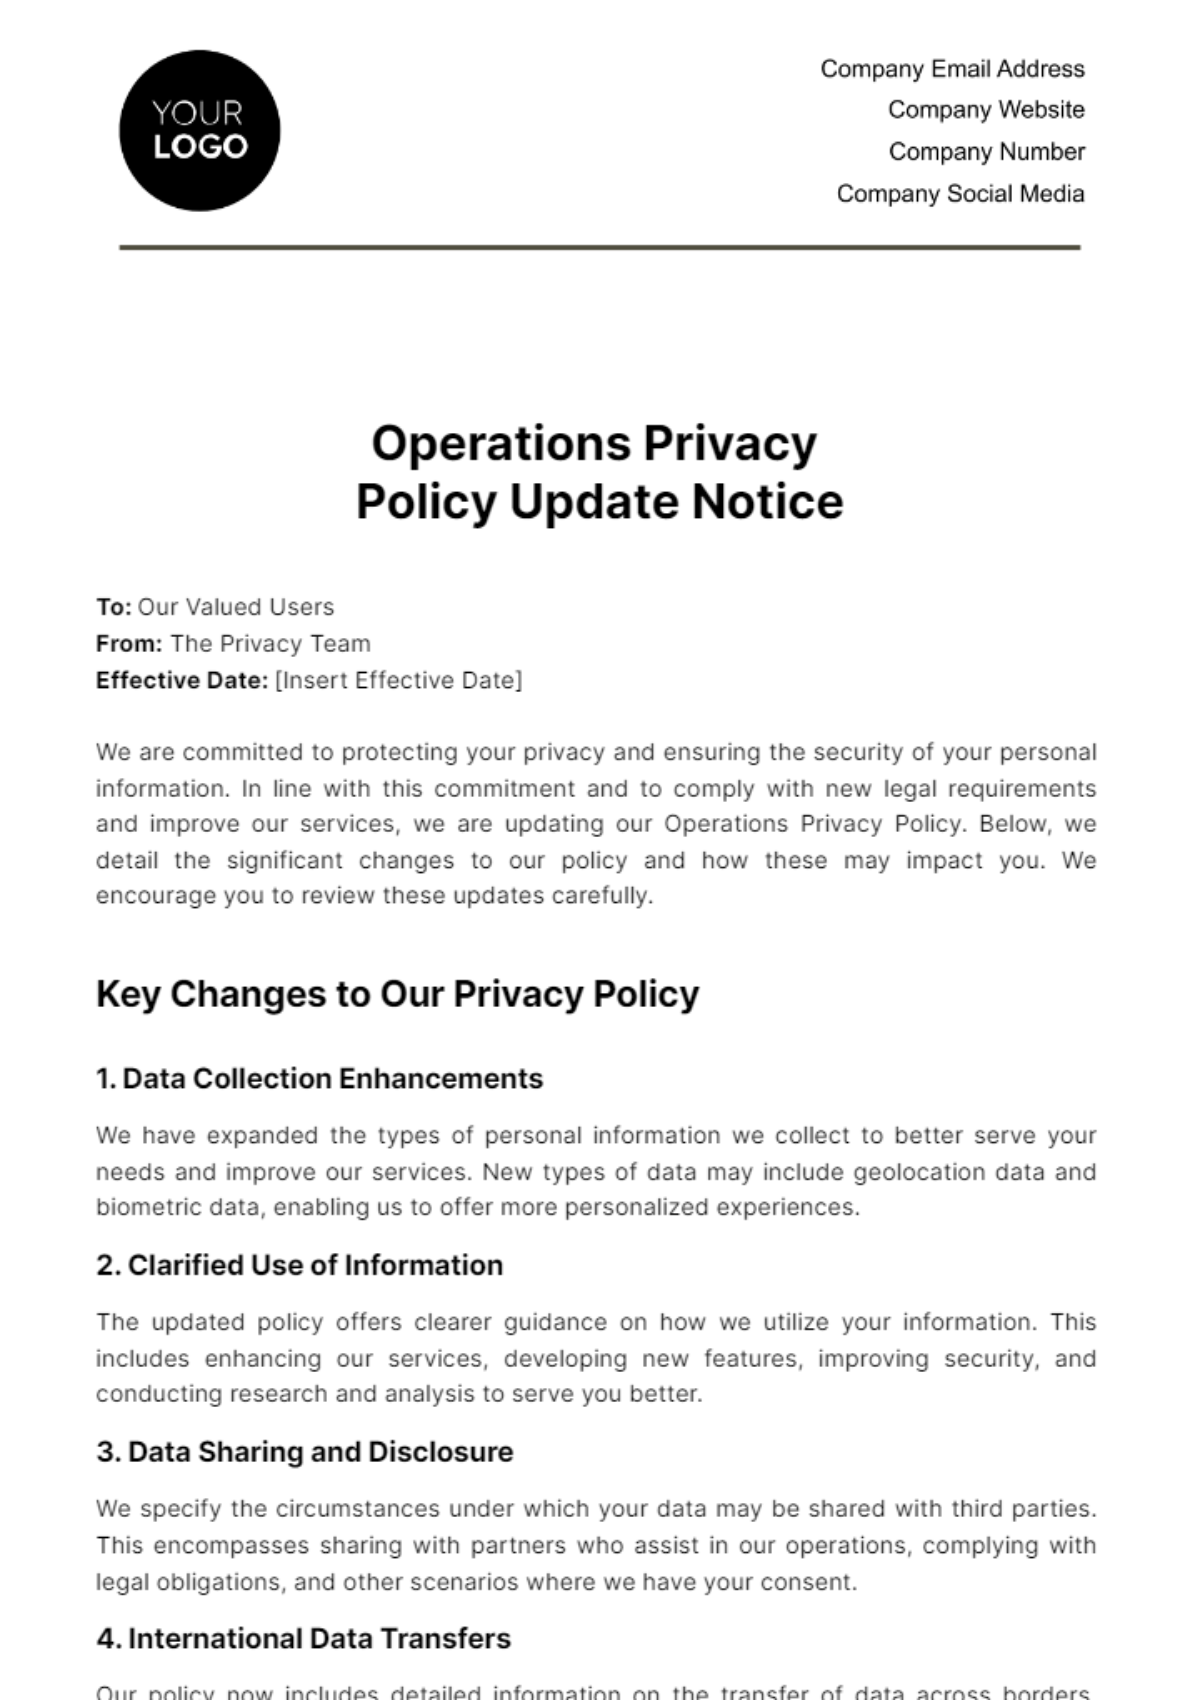 Operations Privacy Policy Update Notice Template